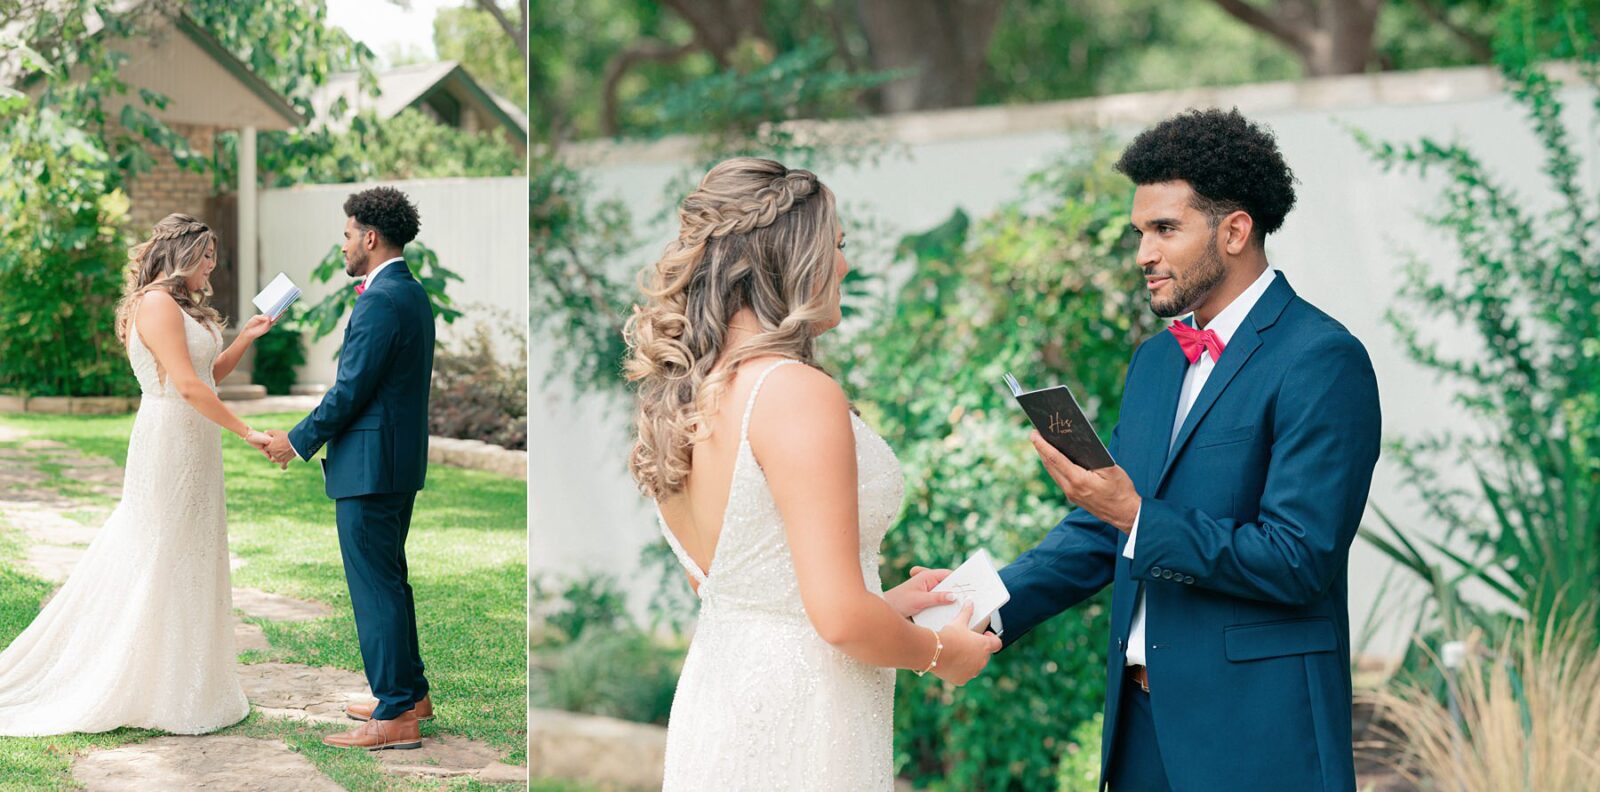 private vow reading before ceremony with just bride and groom after first look, Austin Wedding at Hummingbird House, with wedding photos by Tara Lyons Photography. Other vendors: Mistique Makeup, Cana Events, Twin Flame Events, Simply Chic Event Rentals, Live Oak Photo Booth